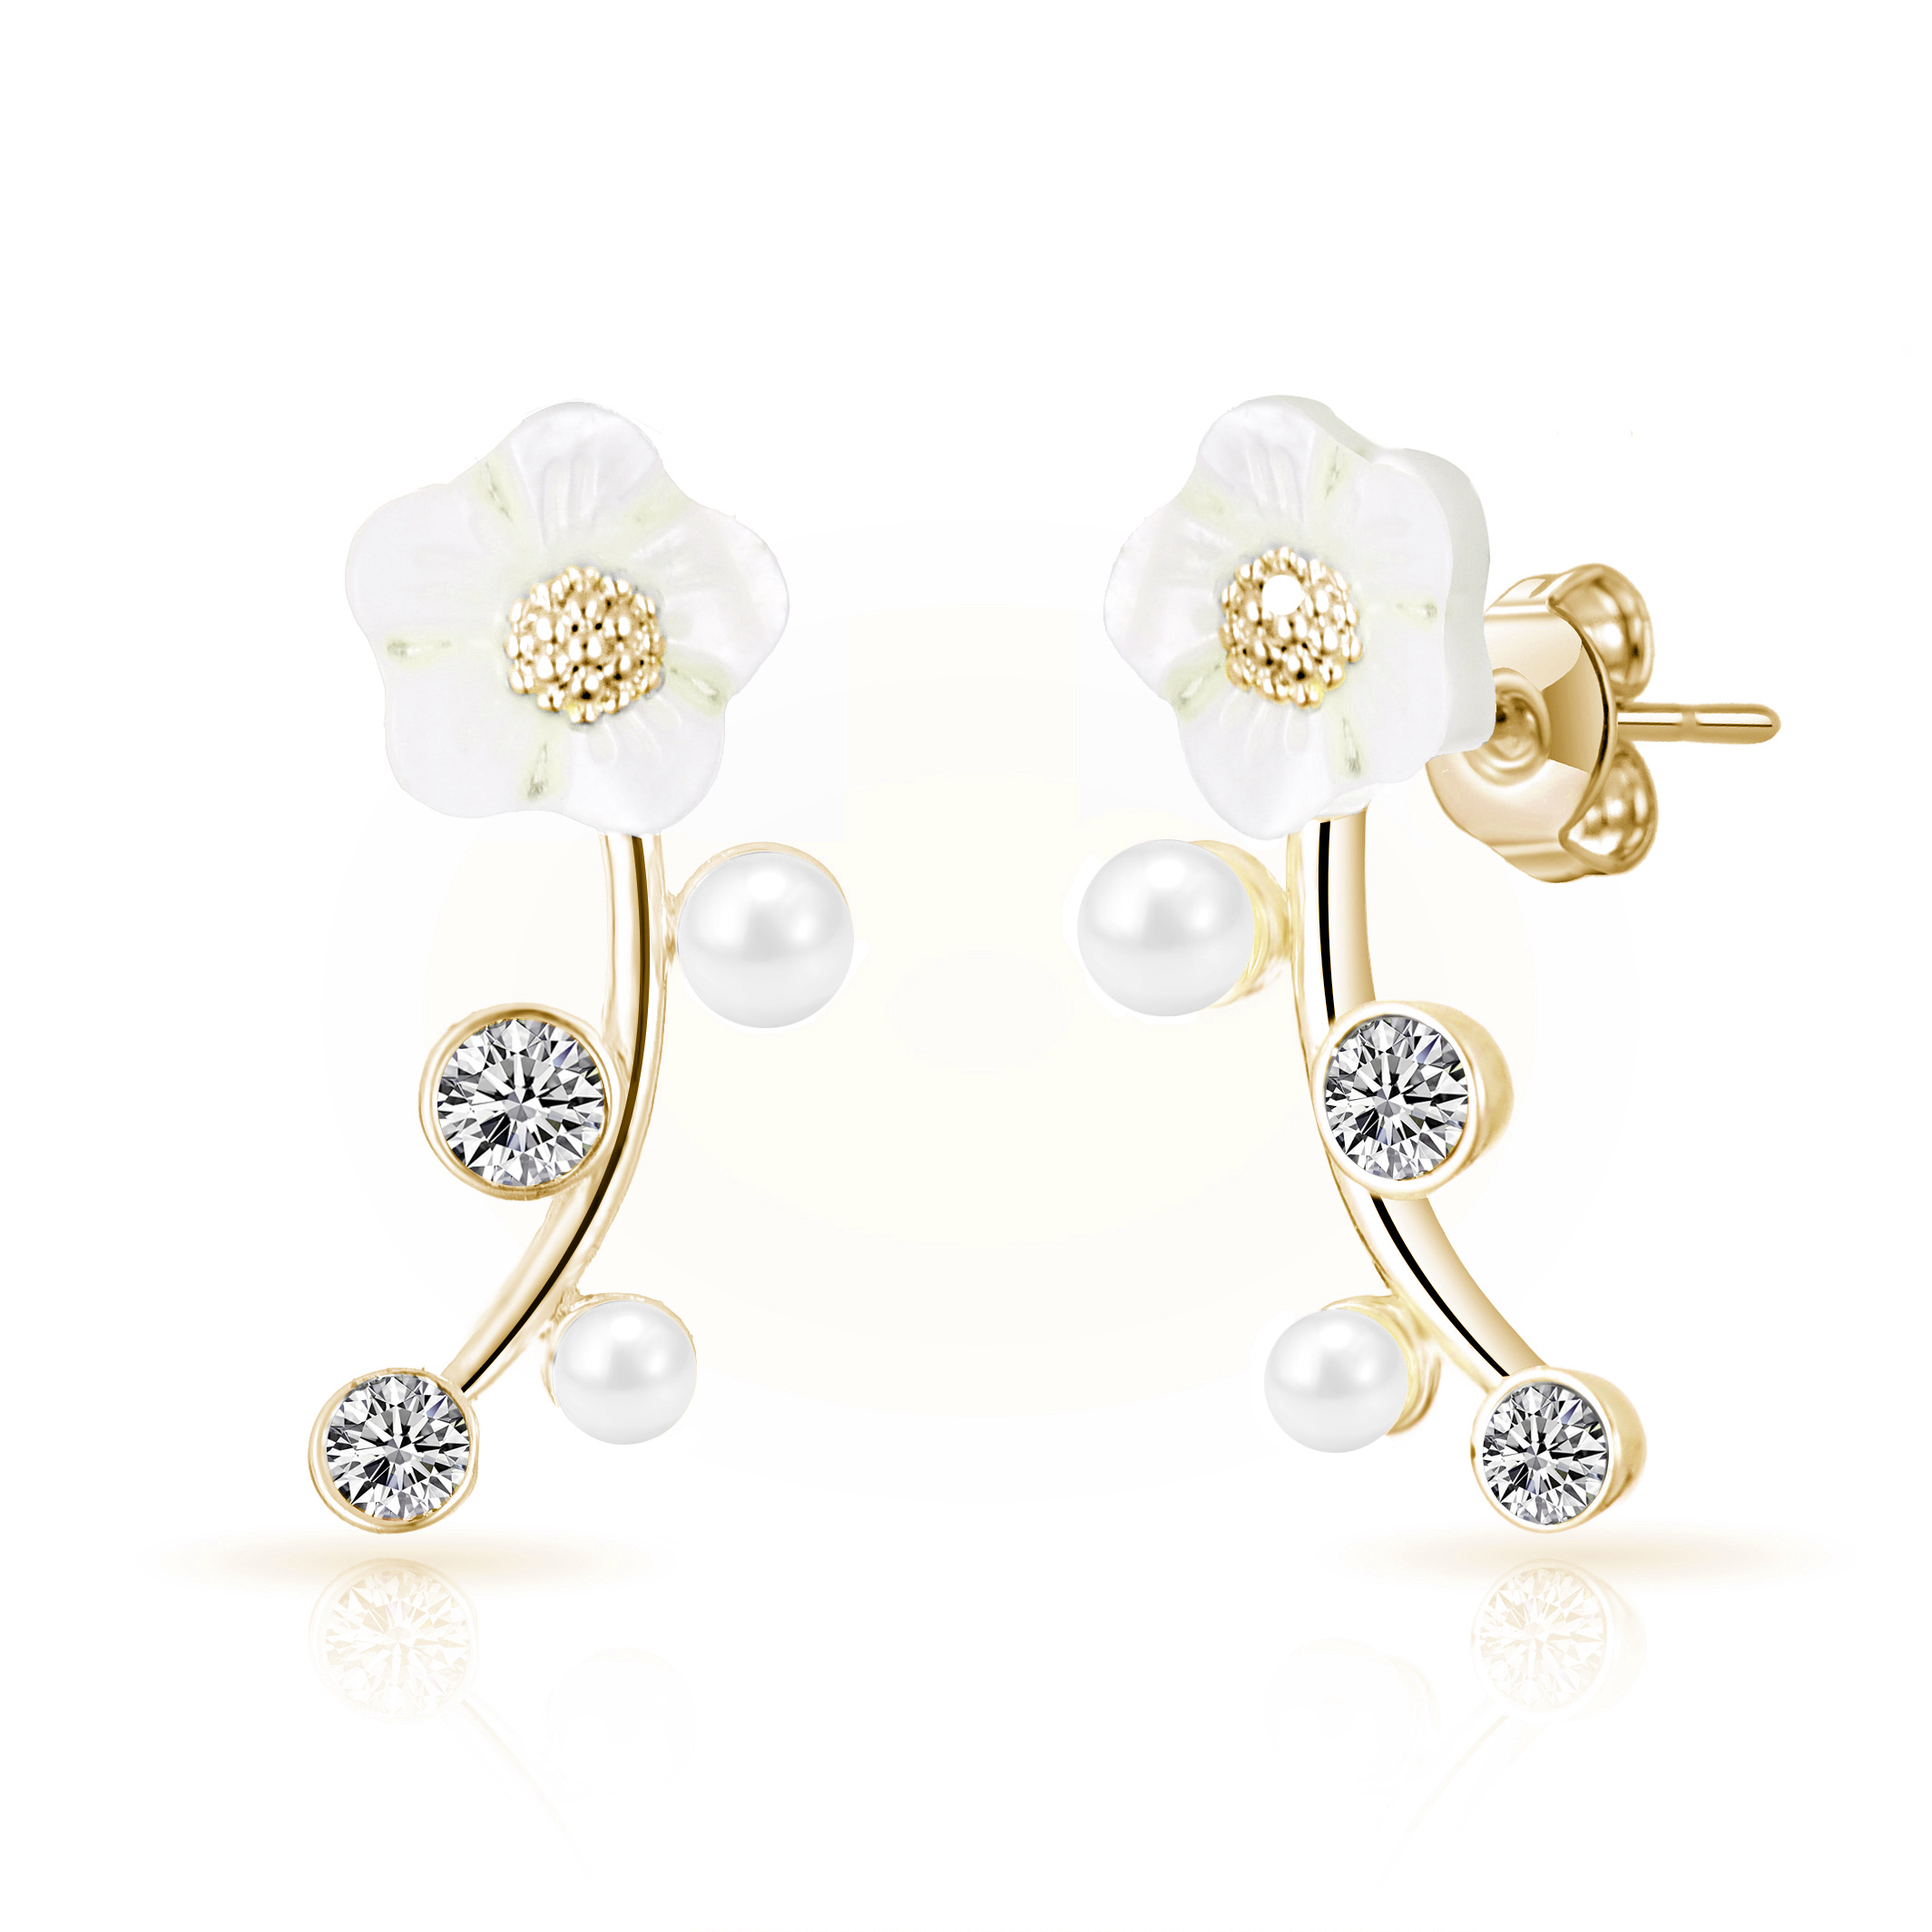 Gold Plated Daisy Climber Earrings Created with Zircondia® Crystals by Philip Jones Jewellery